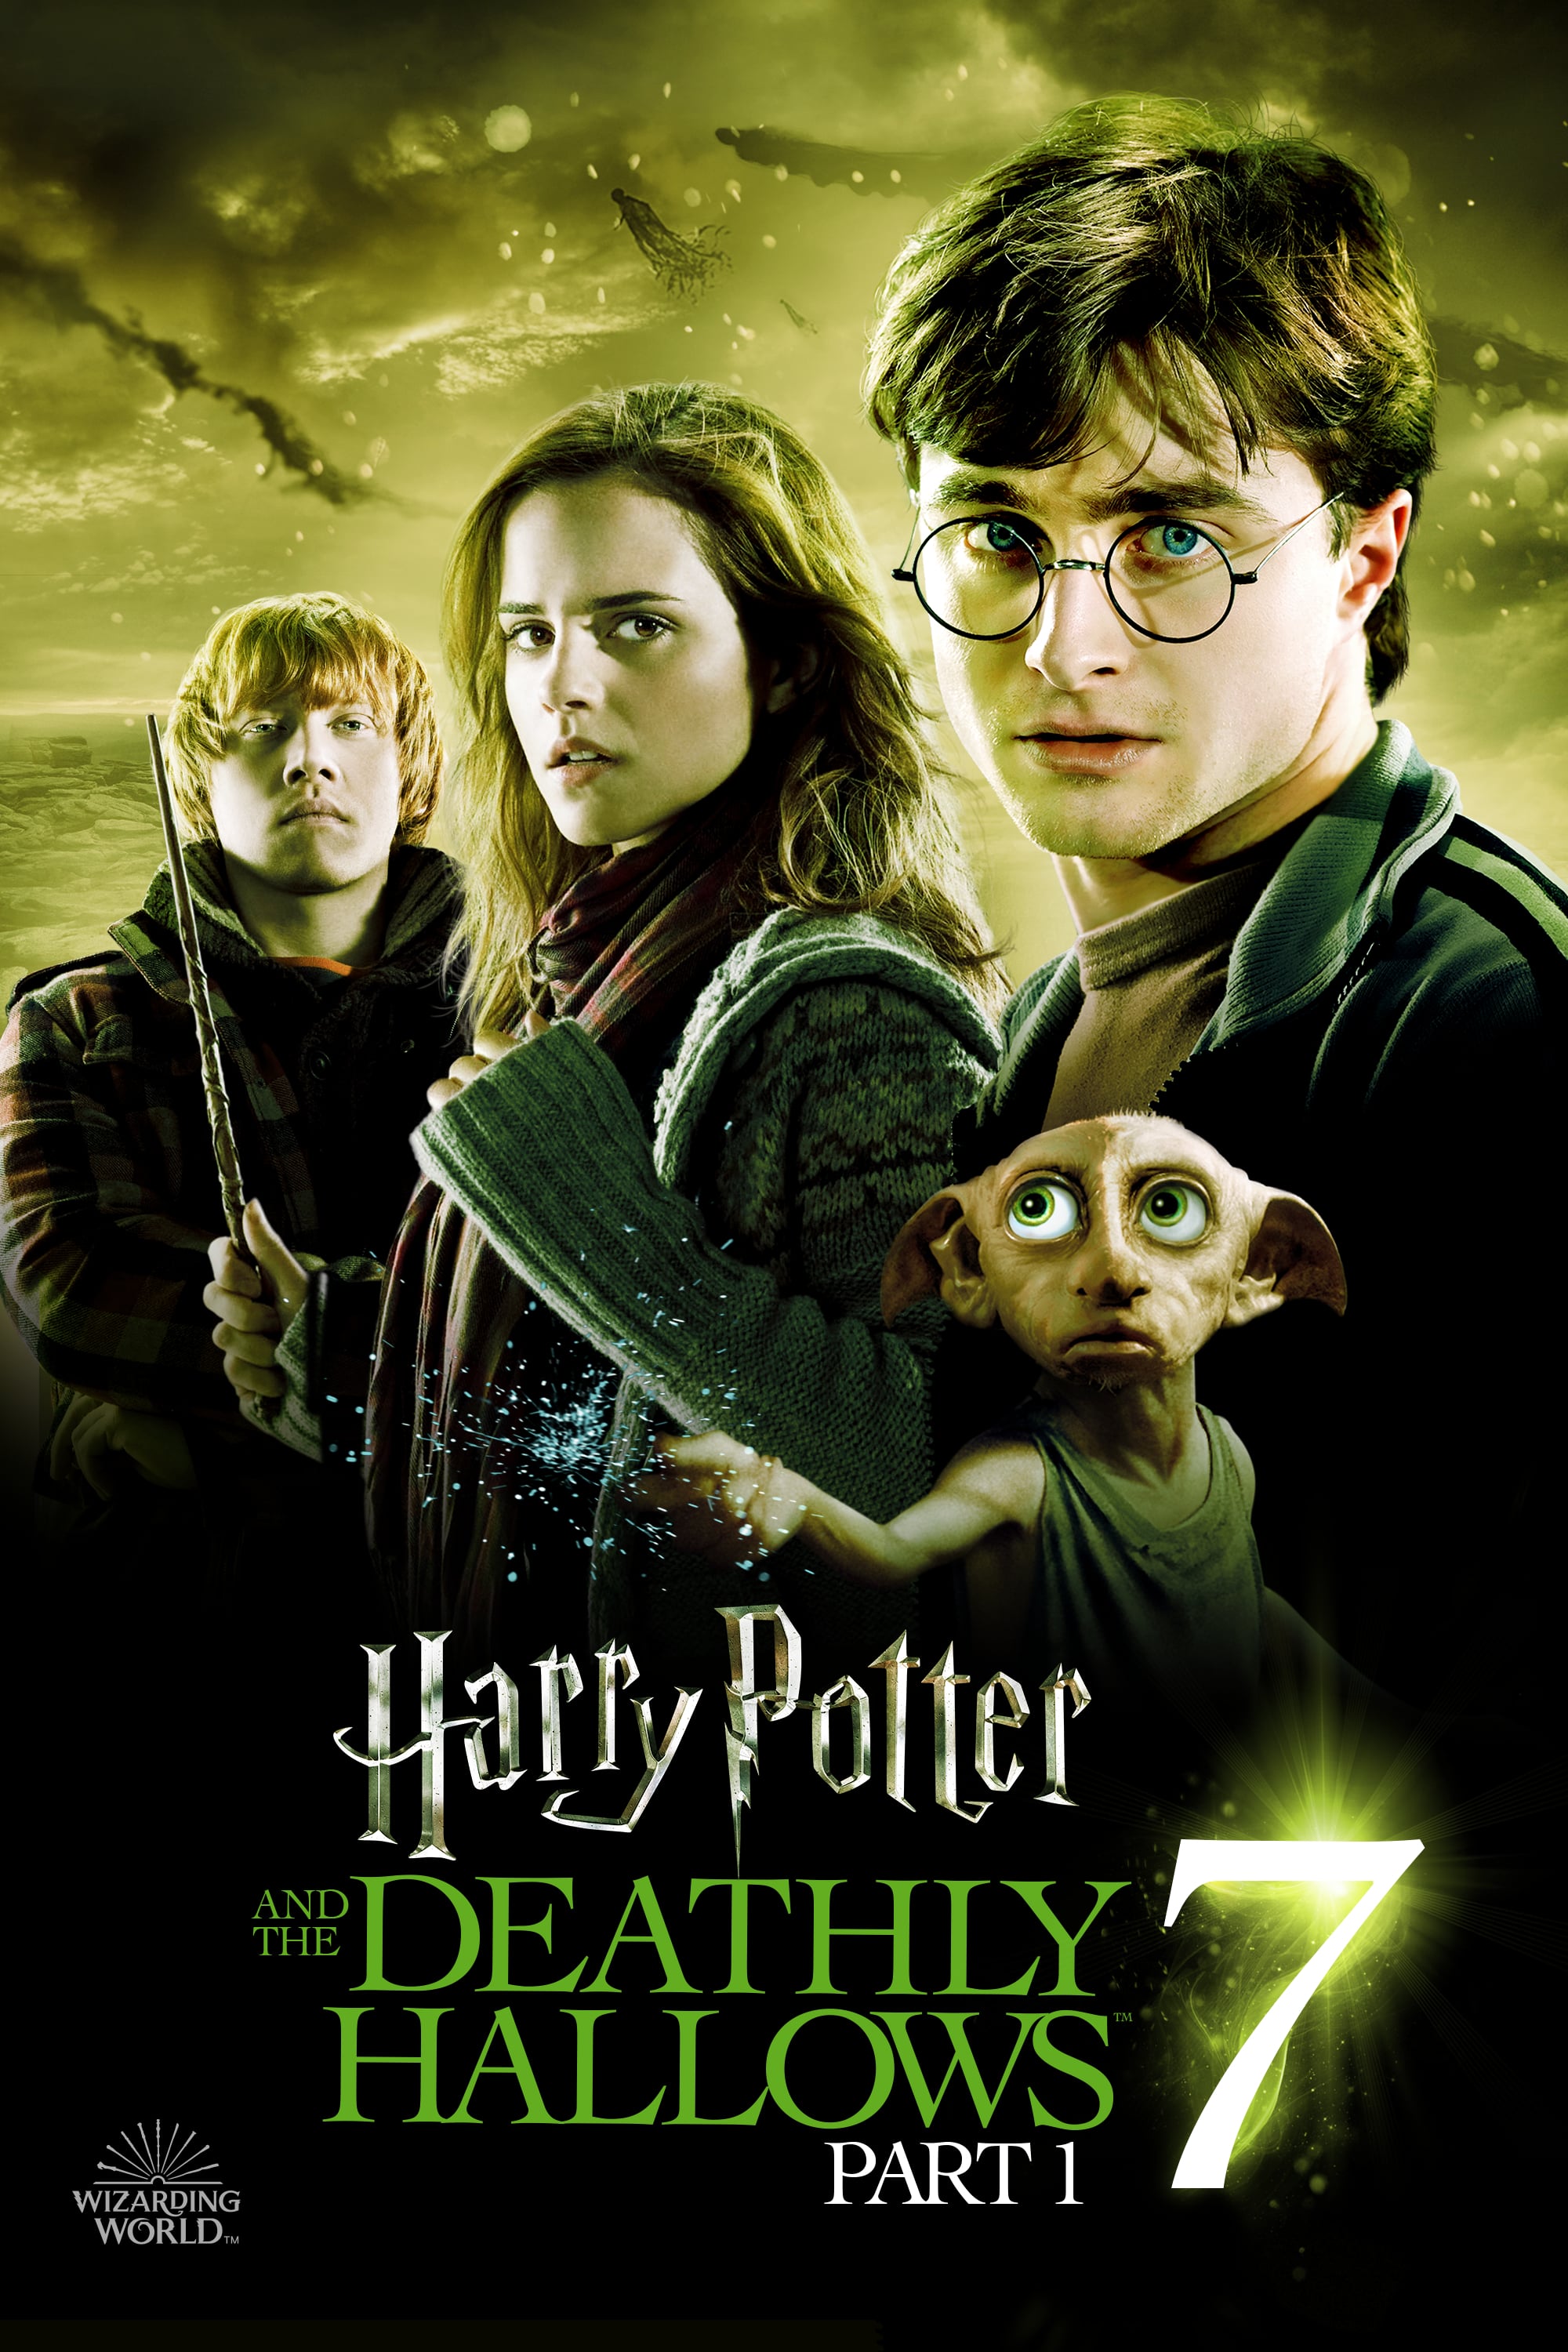 harry potter and the deathly hallows: part 1 movie